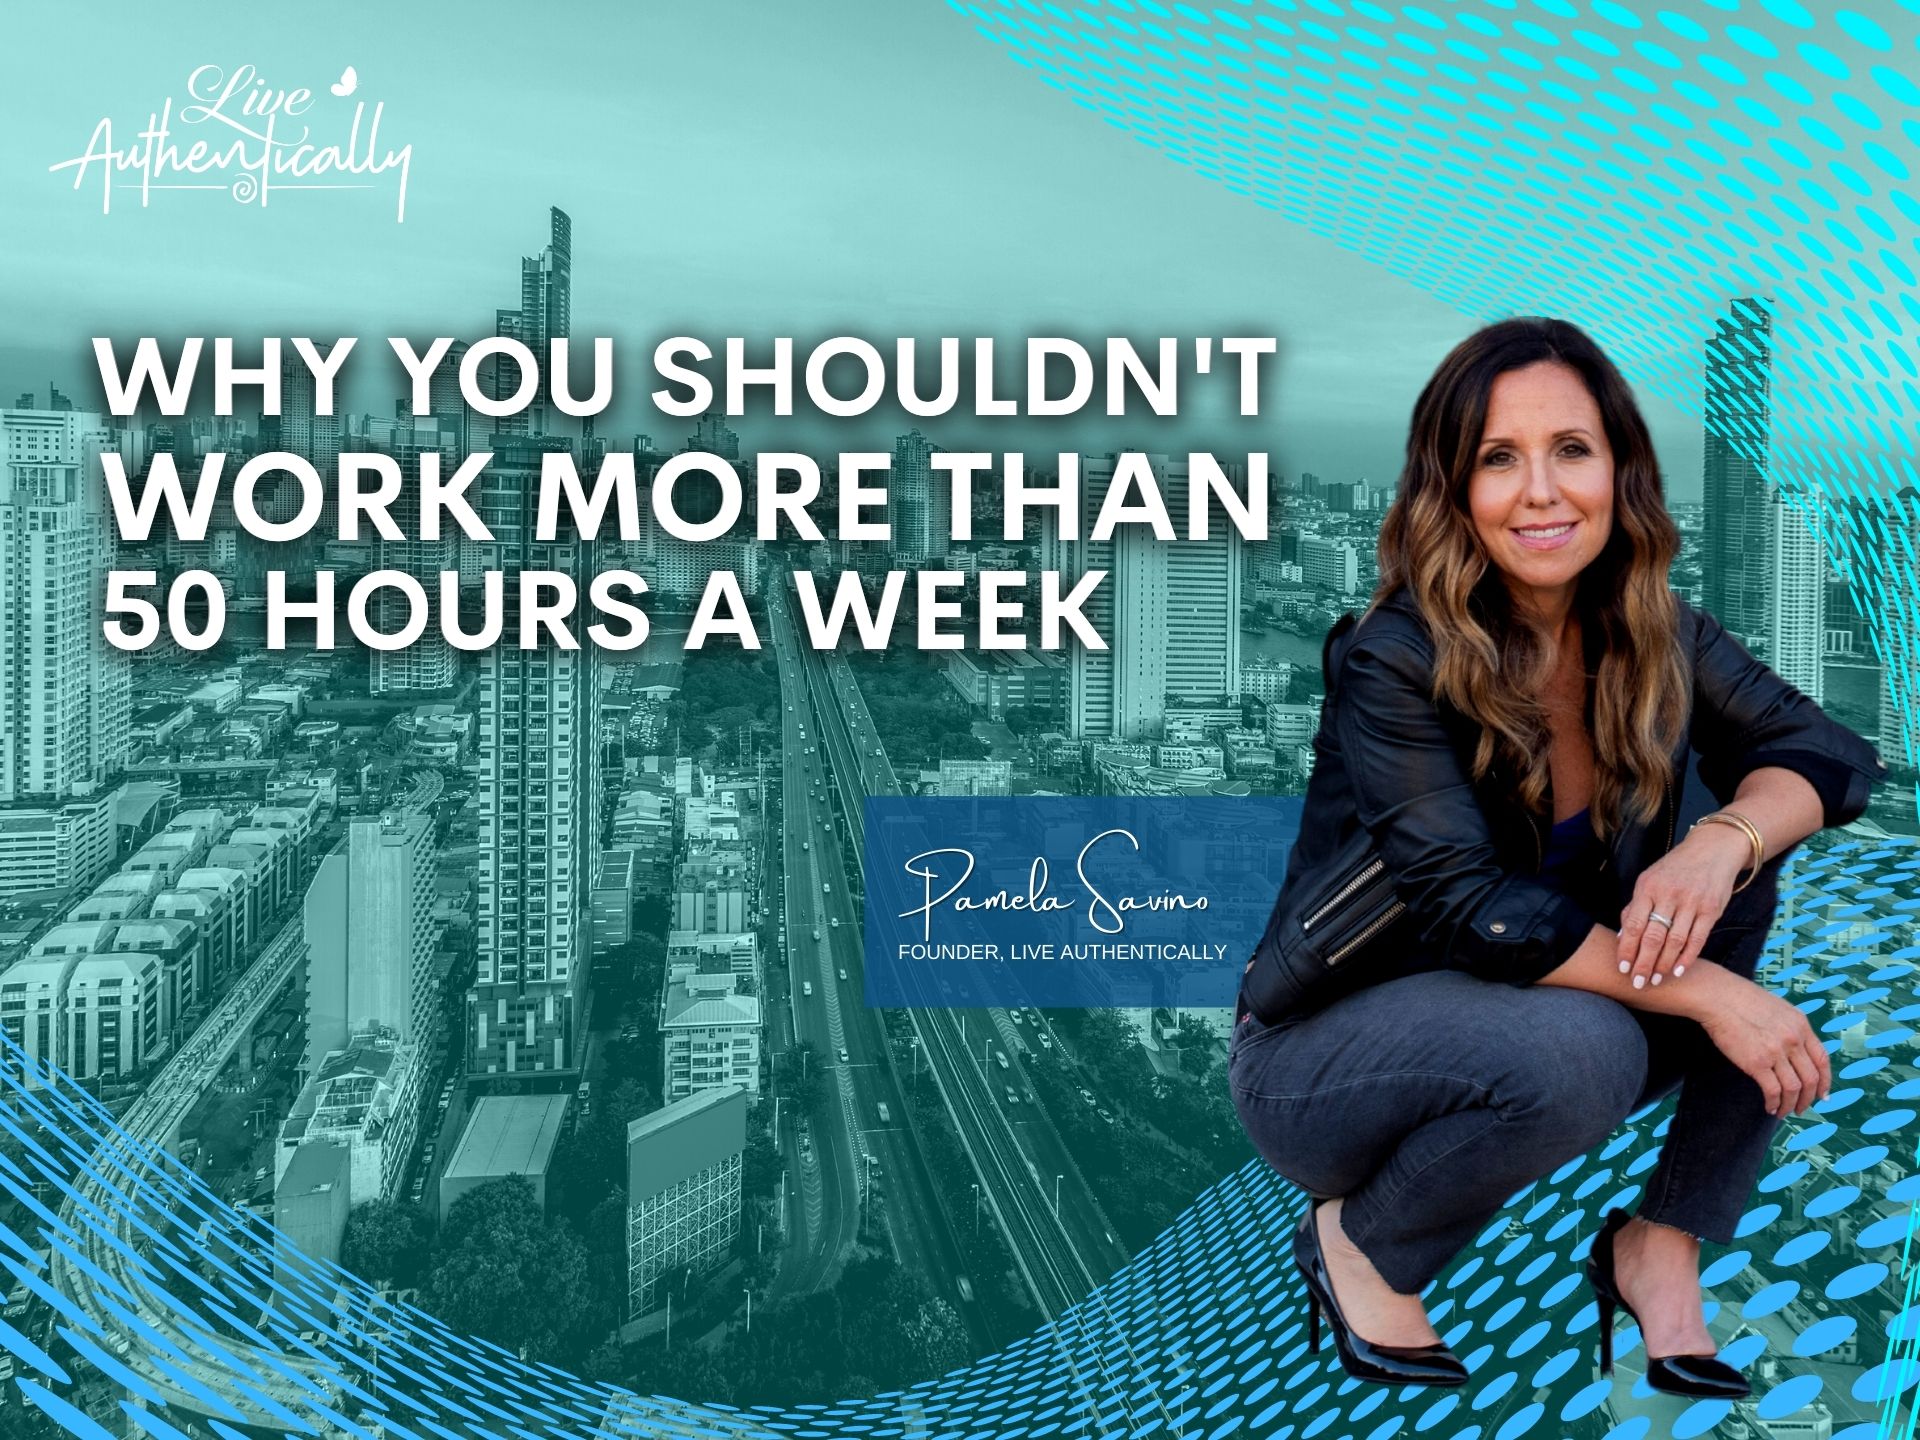 Why You Shouldn’t Work More Than 50 Hours a Week